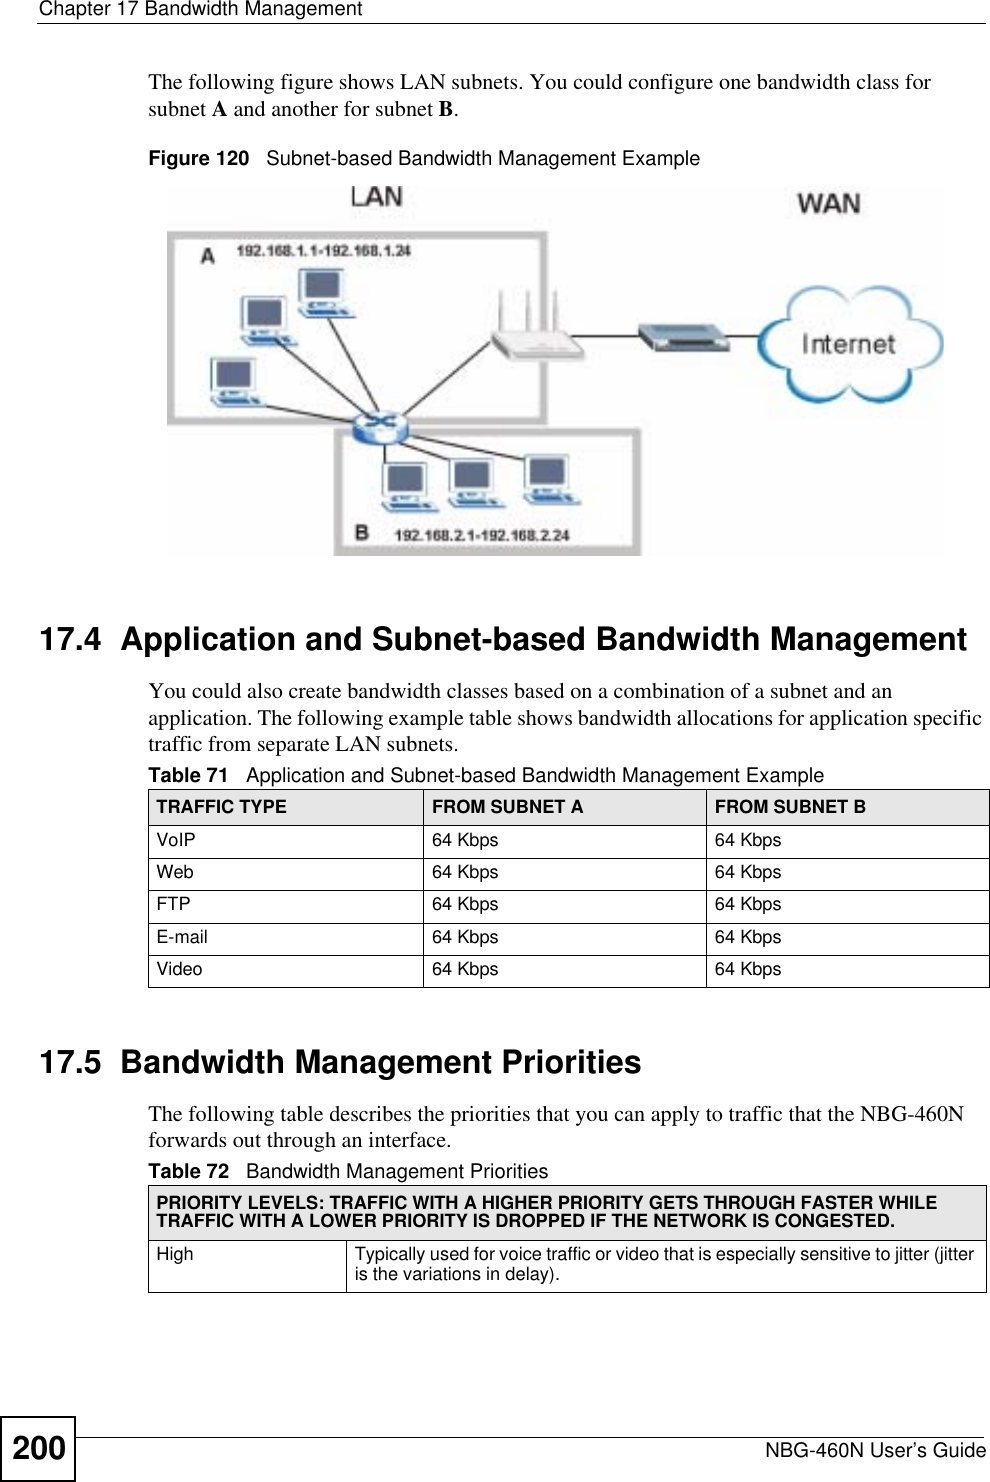 Chapter 17 Bandwidth ManagementNBG-460N User’s Guide200The following figure shows LAN subnets. You could configure one bandwidth class for subnet A and another for subnet B.Figure 120   Subnet-based Bandwidth Management Example17.4  Application and Subnet-based Bandwidth ManagementYou could also create bandwidth classes based on a combination of a subnet and an application. The following example table shows bandwidth allocations for application specific traffic from separate LAN subnets.17.5  Bandwidth Management Priorities The following table describes the priorities that you can apply to traffic that the NBG-460N forwards out through an interface.Table 71   Application and Subnet-based Bandwidth Management Example TRAFFIC TYPE FROM SUBNET A FROM SUBNET BVoIP 64 Kbps 64 KbpsWeb 64 Kbps 64 KbpsFTP 64 Kbps 64 KbpsE-mail 64 Kbps 64 KbpsVideo 64 Kbps 64 KbpsTable 72   Bandwidth Management PrioritiesPRIORITY LEVELS: TRAFFIC WITH A HIGHER PRIORITY GETS THROUGH FASTER WHILE TRAFFIC WITH A LOWER PRIORITY IS DROPPED IF THE NETWORK IS CONGESTED.High Typically used for voice traffic or video that is especially sensitive to jitter (jitter is the variations in delay).